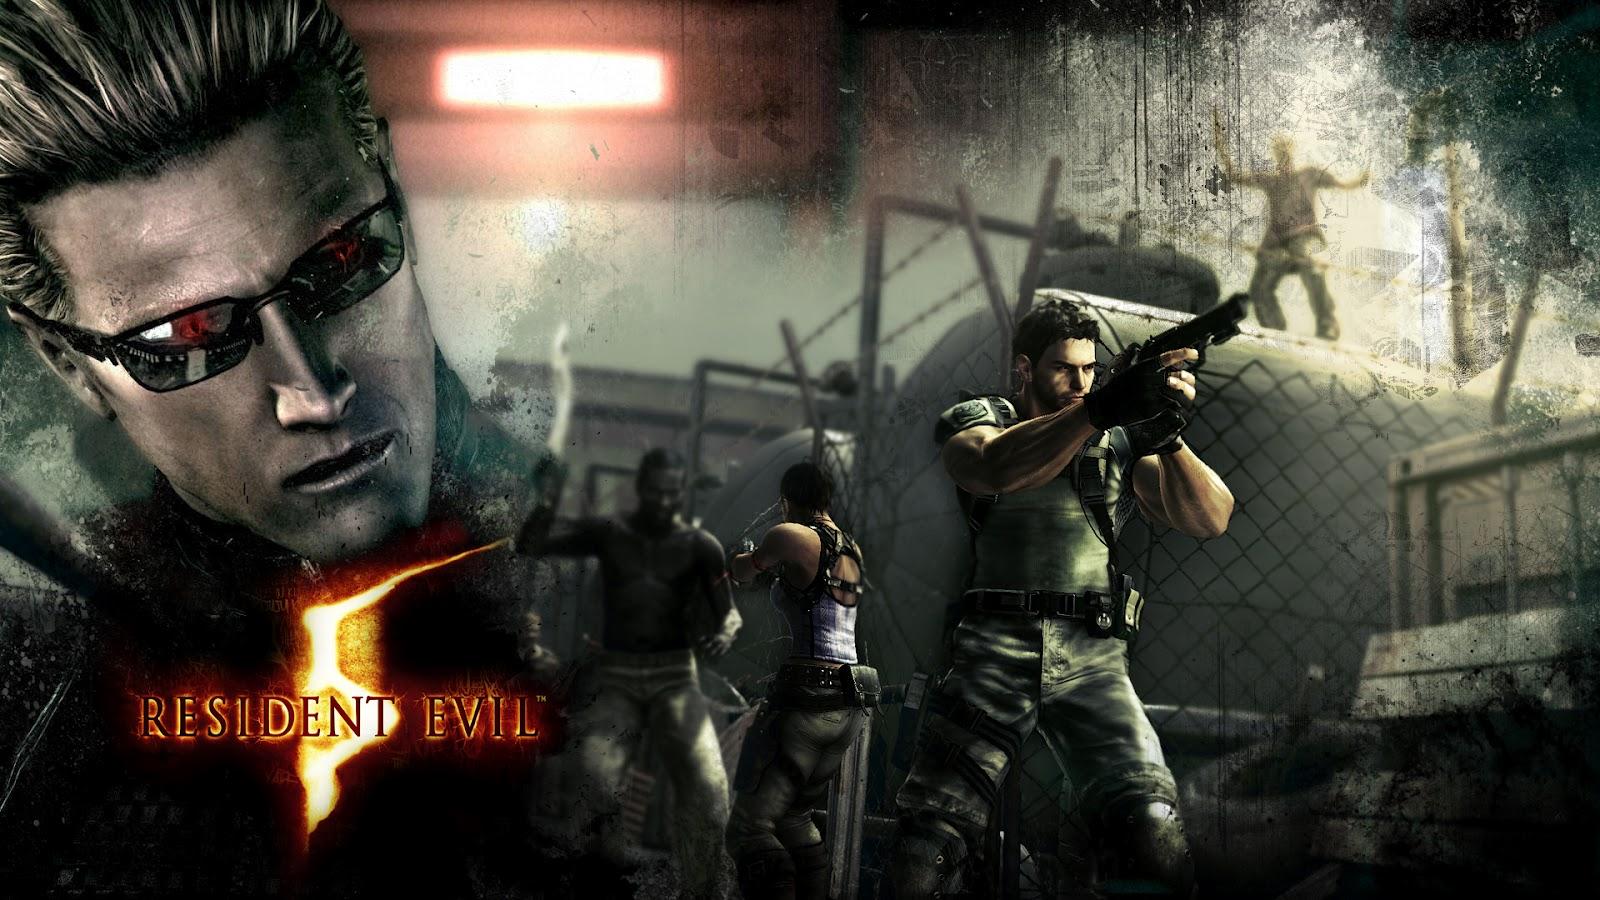 Incredible Wallpaper Beautiful Resident Evil 5 Background